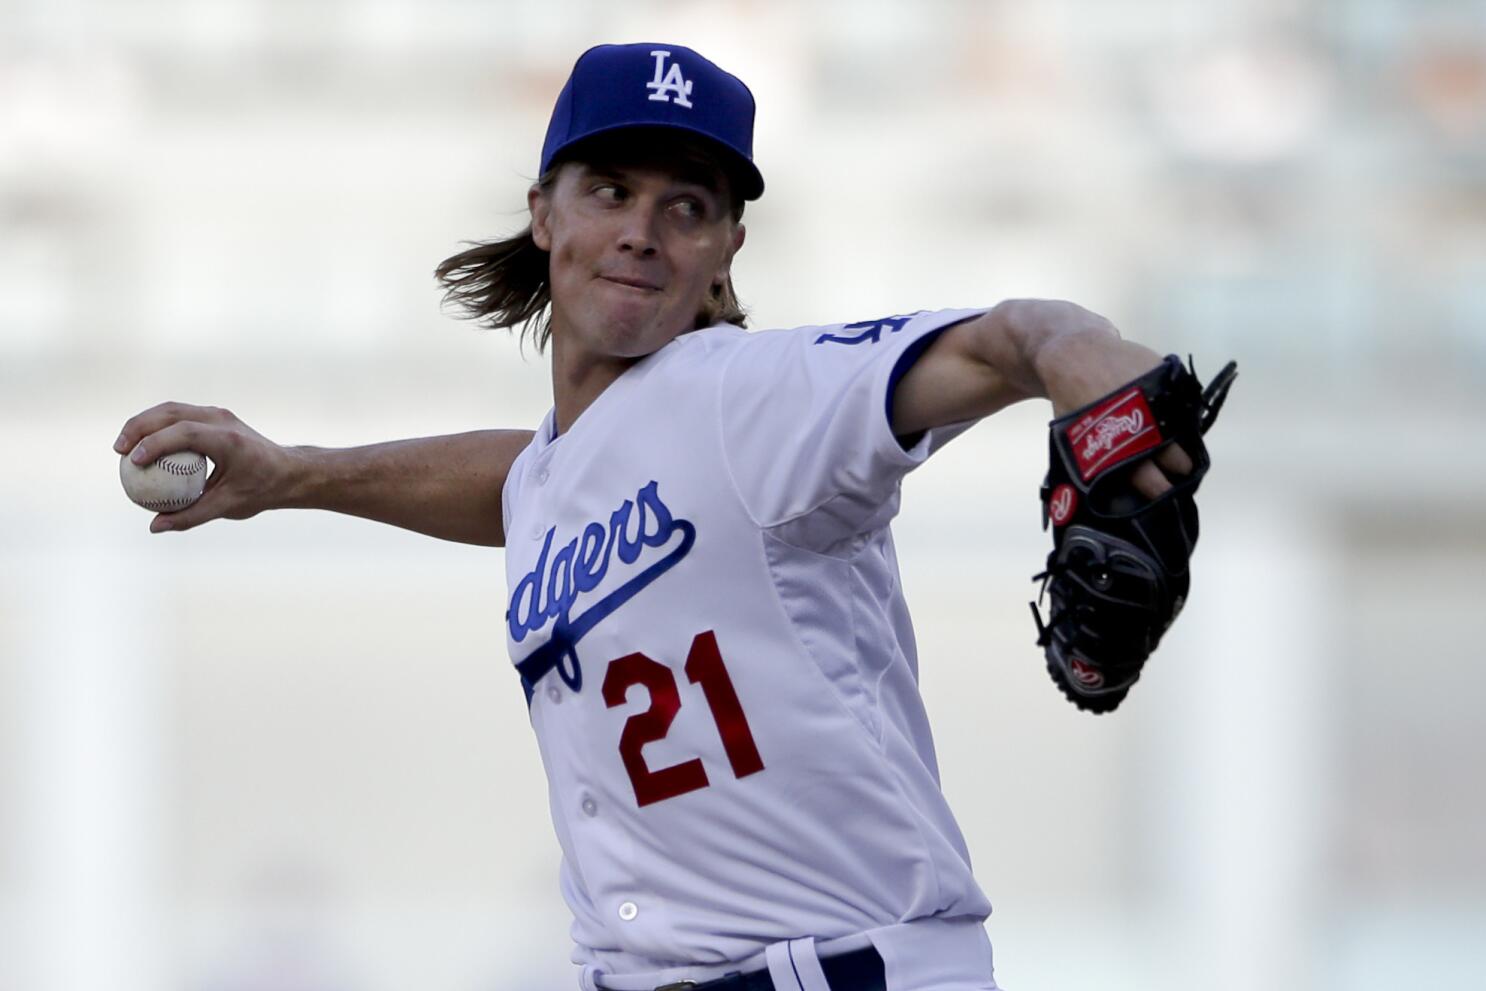 Zack Greinke opts out of All-Star Game